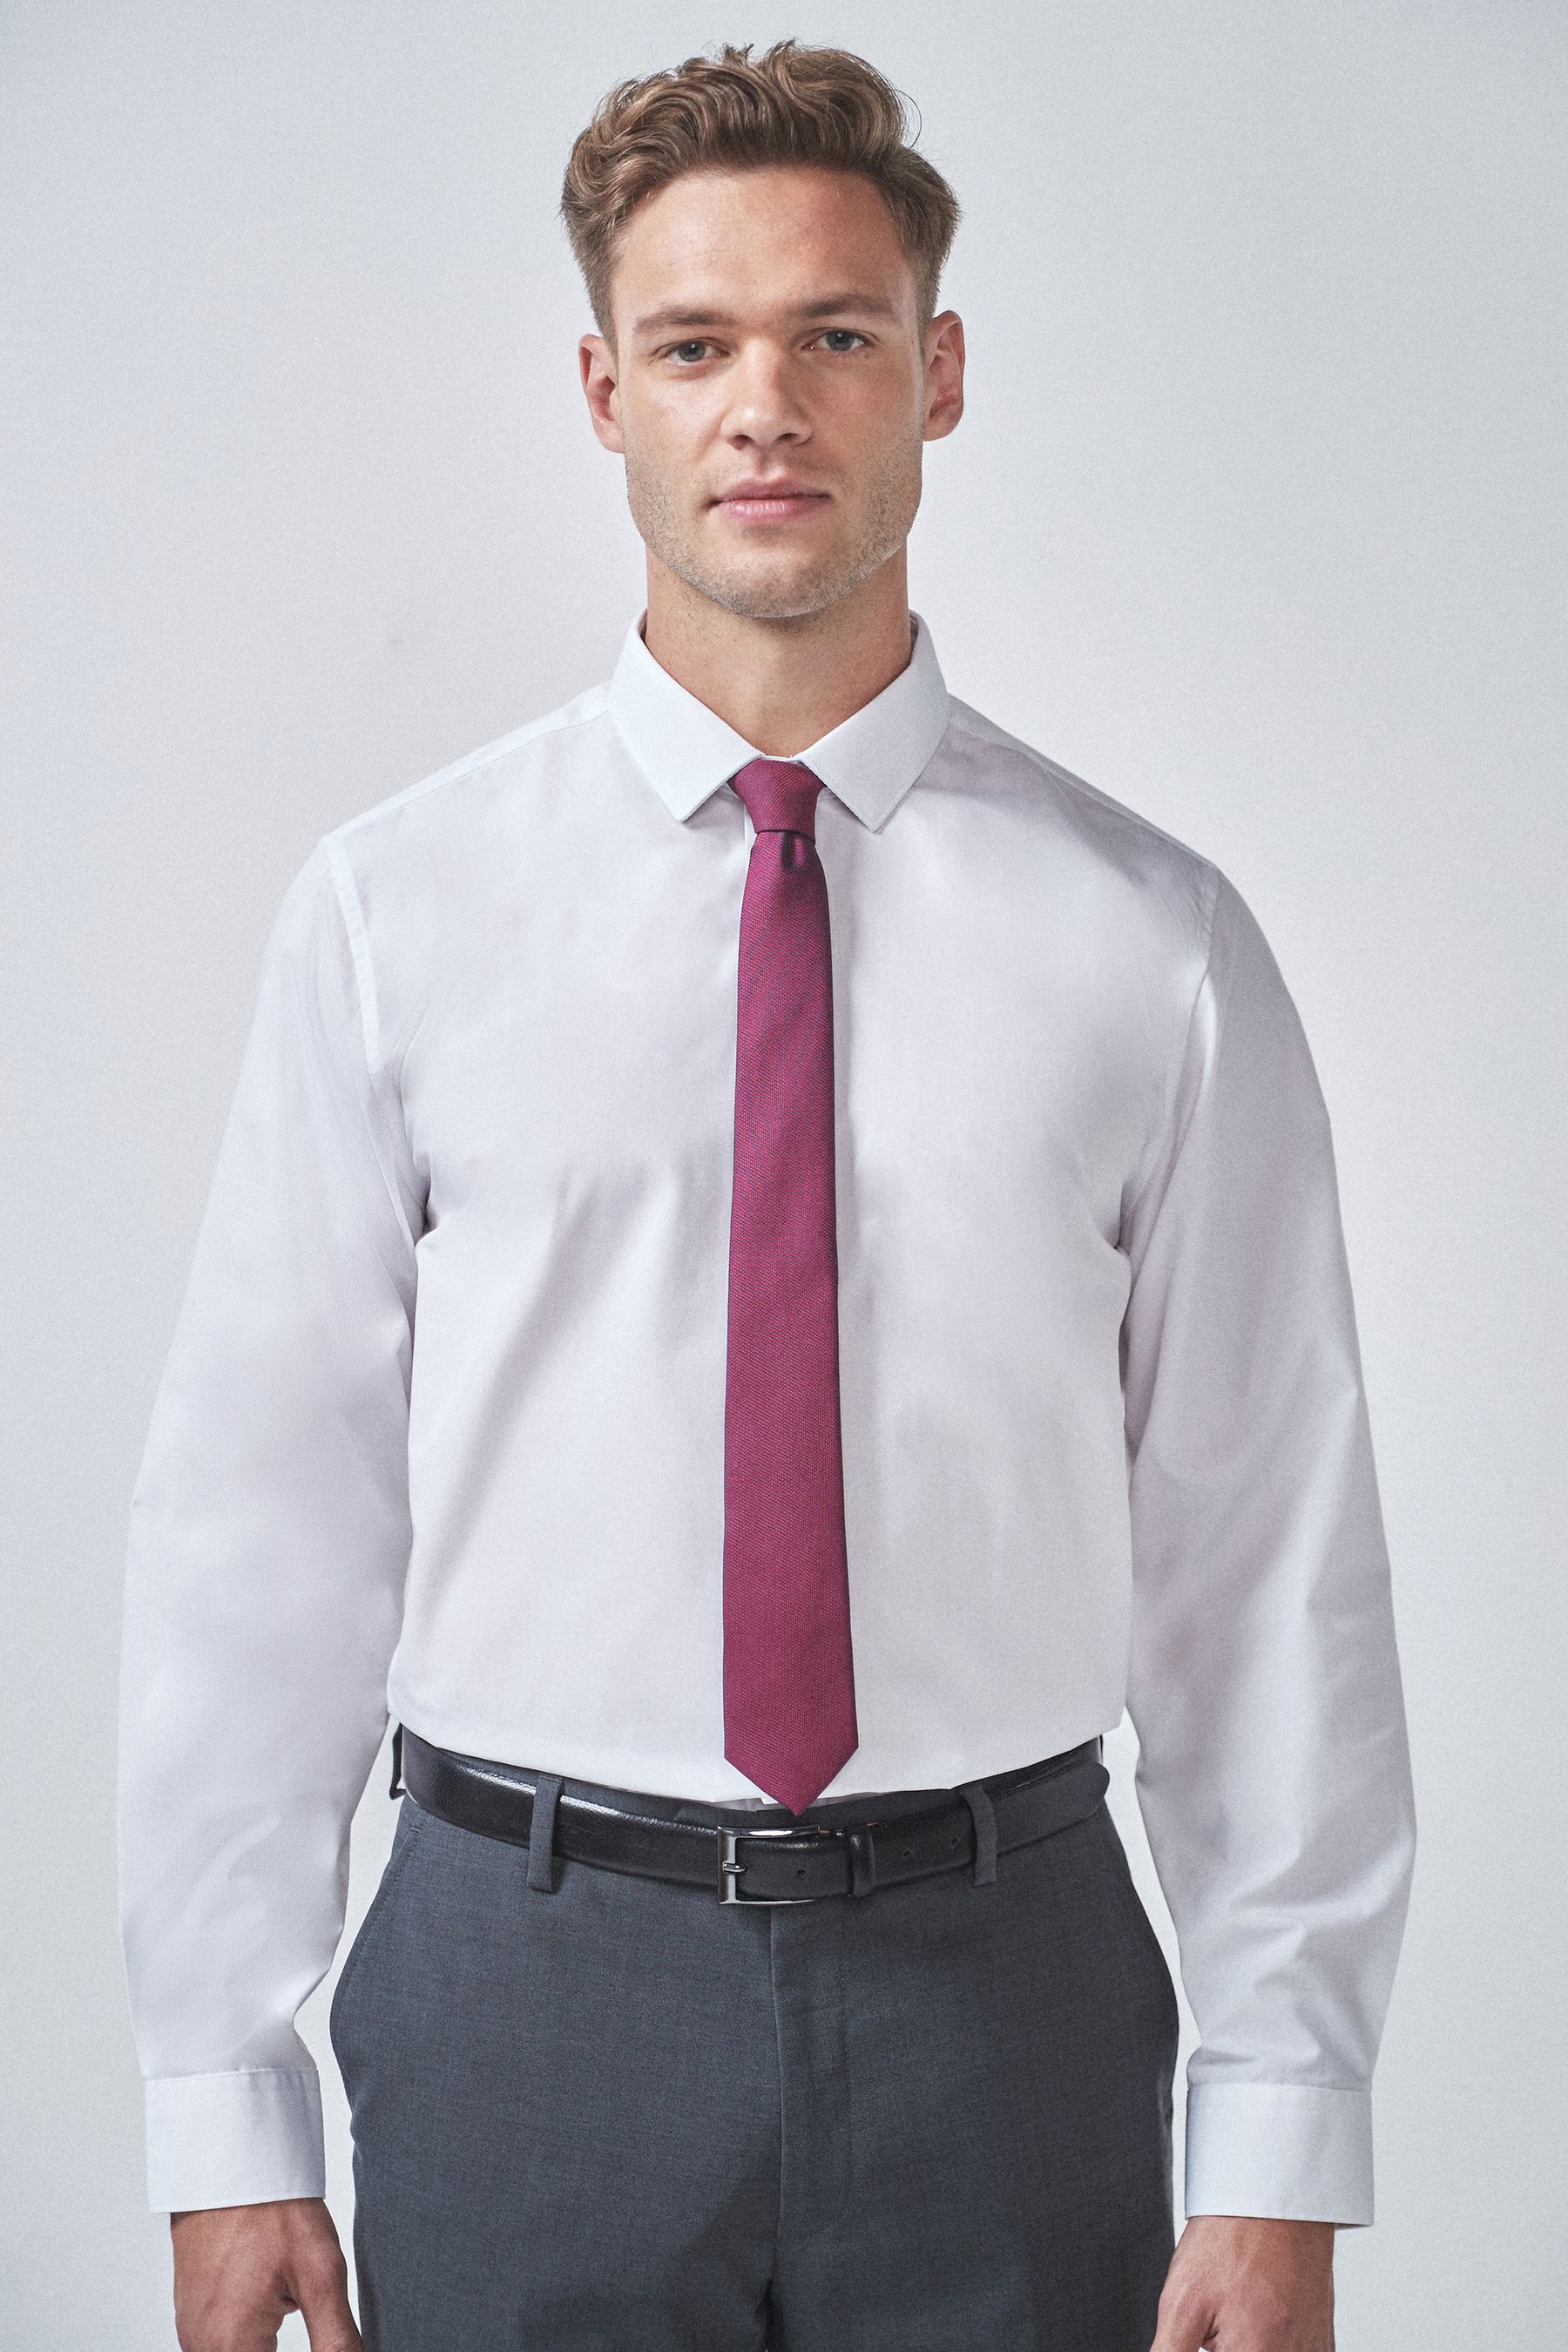 Buy White Regular Fit Cotton Single Cuff Shirt from the Next UK online shop